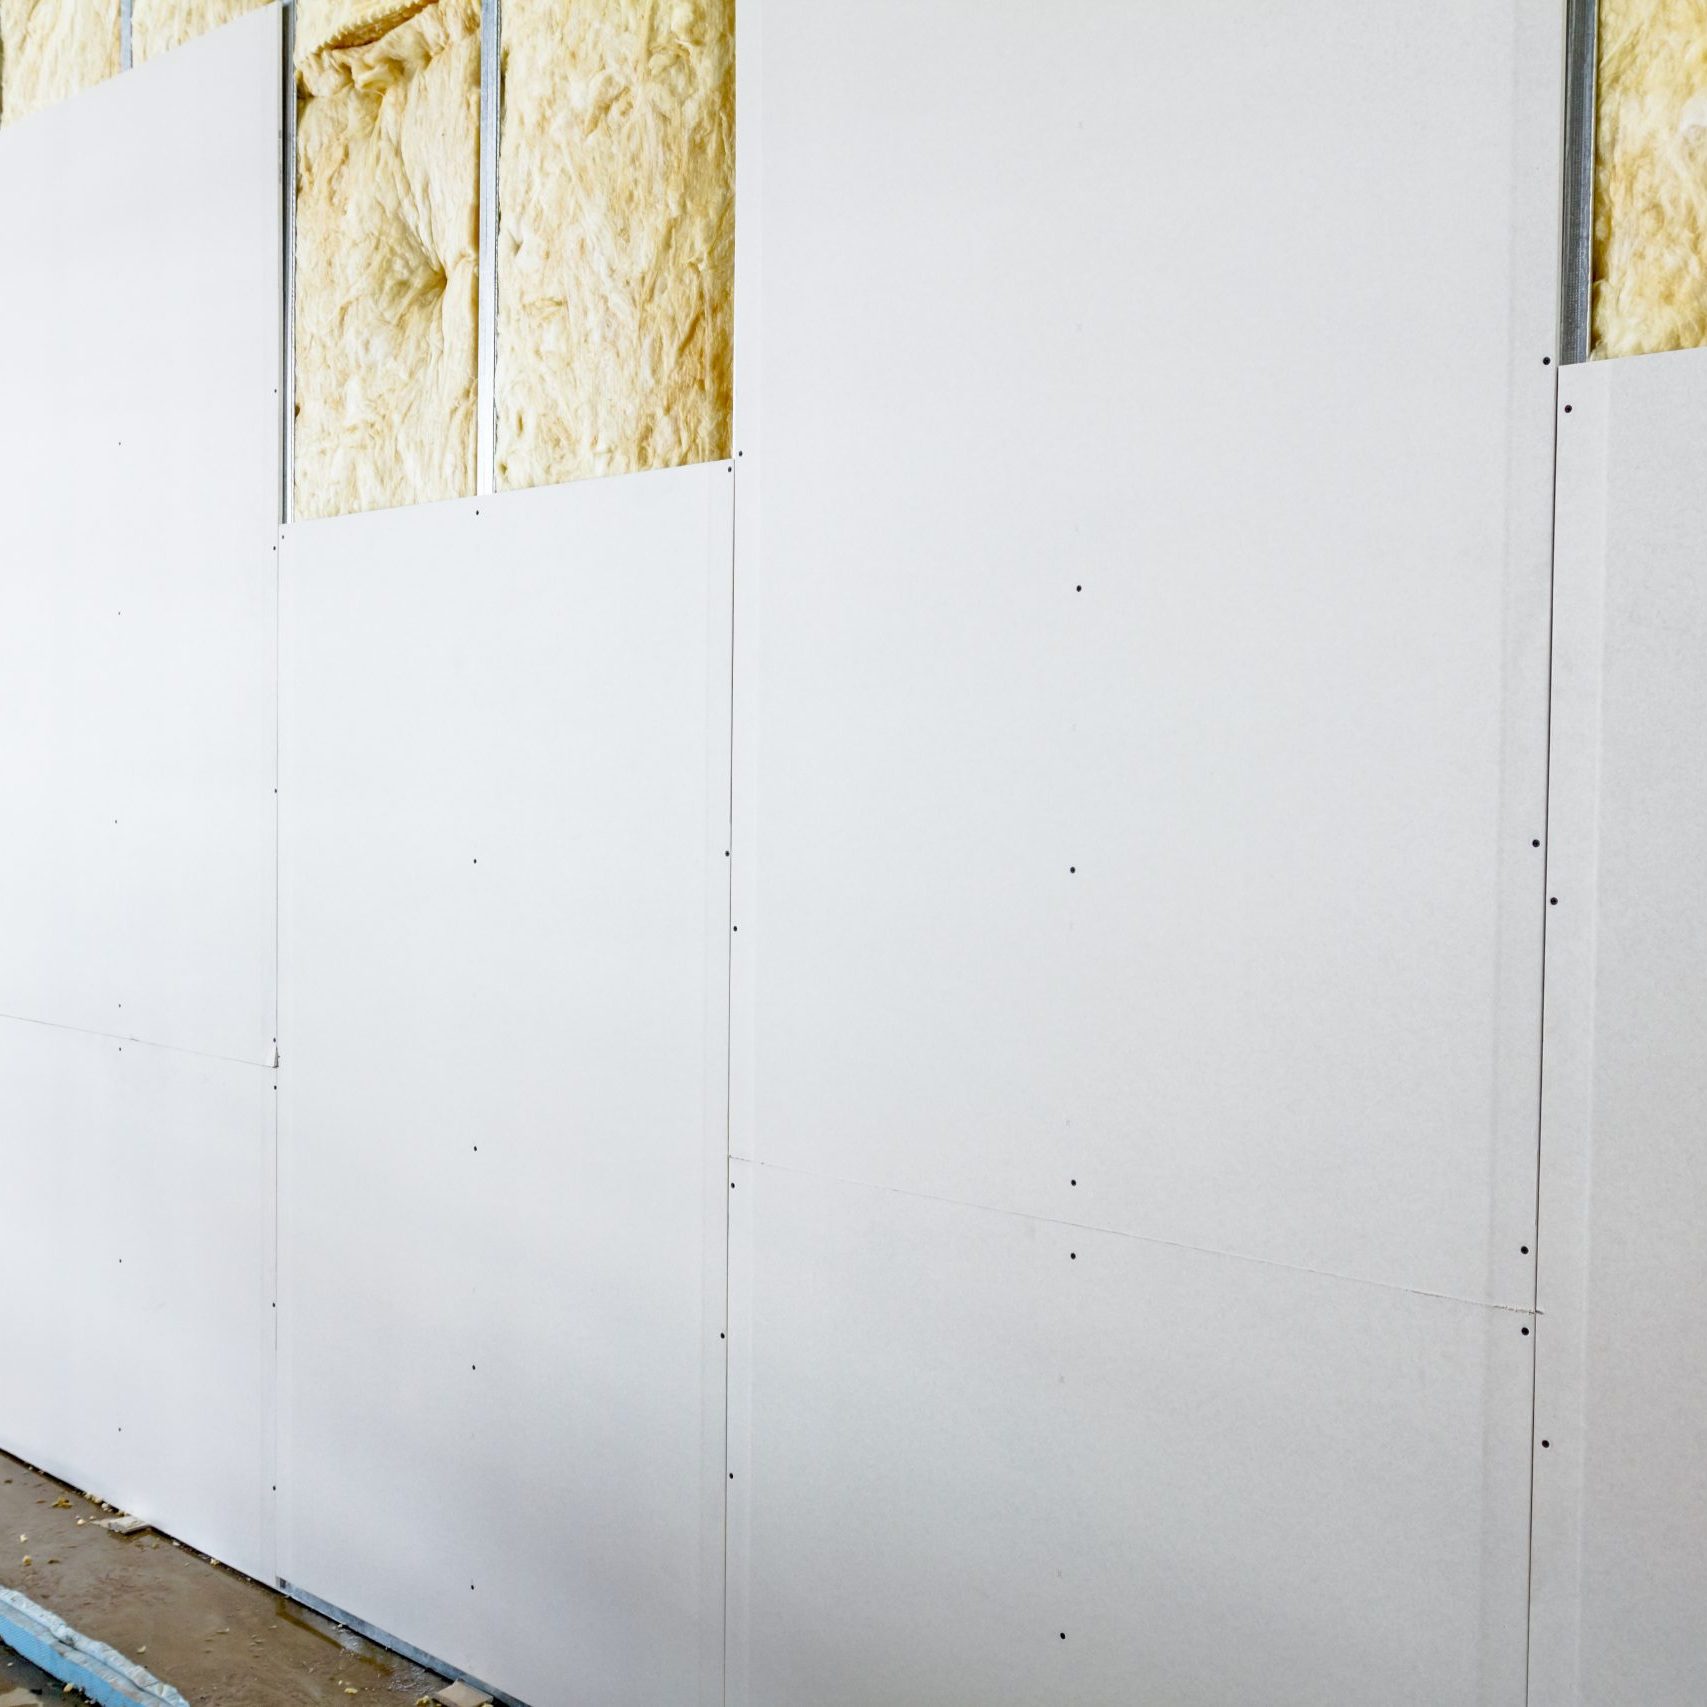 View at unfinished thermal partition dry wall with mineral wool.